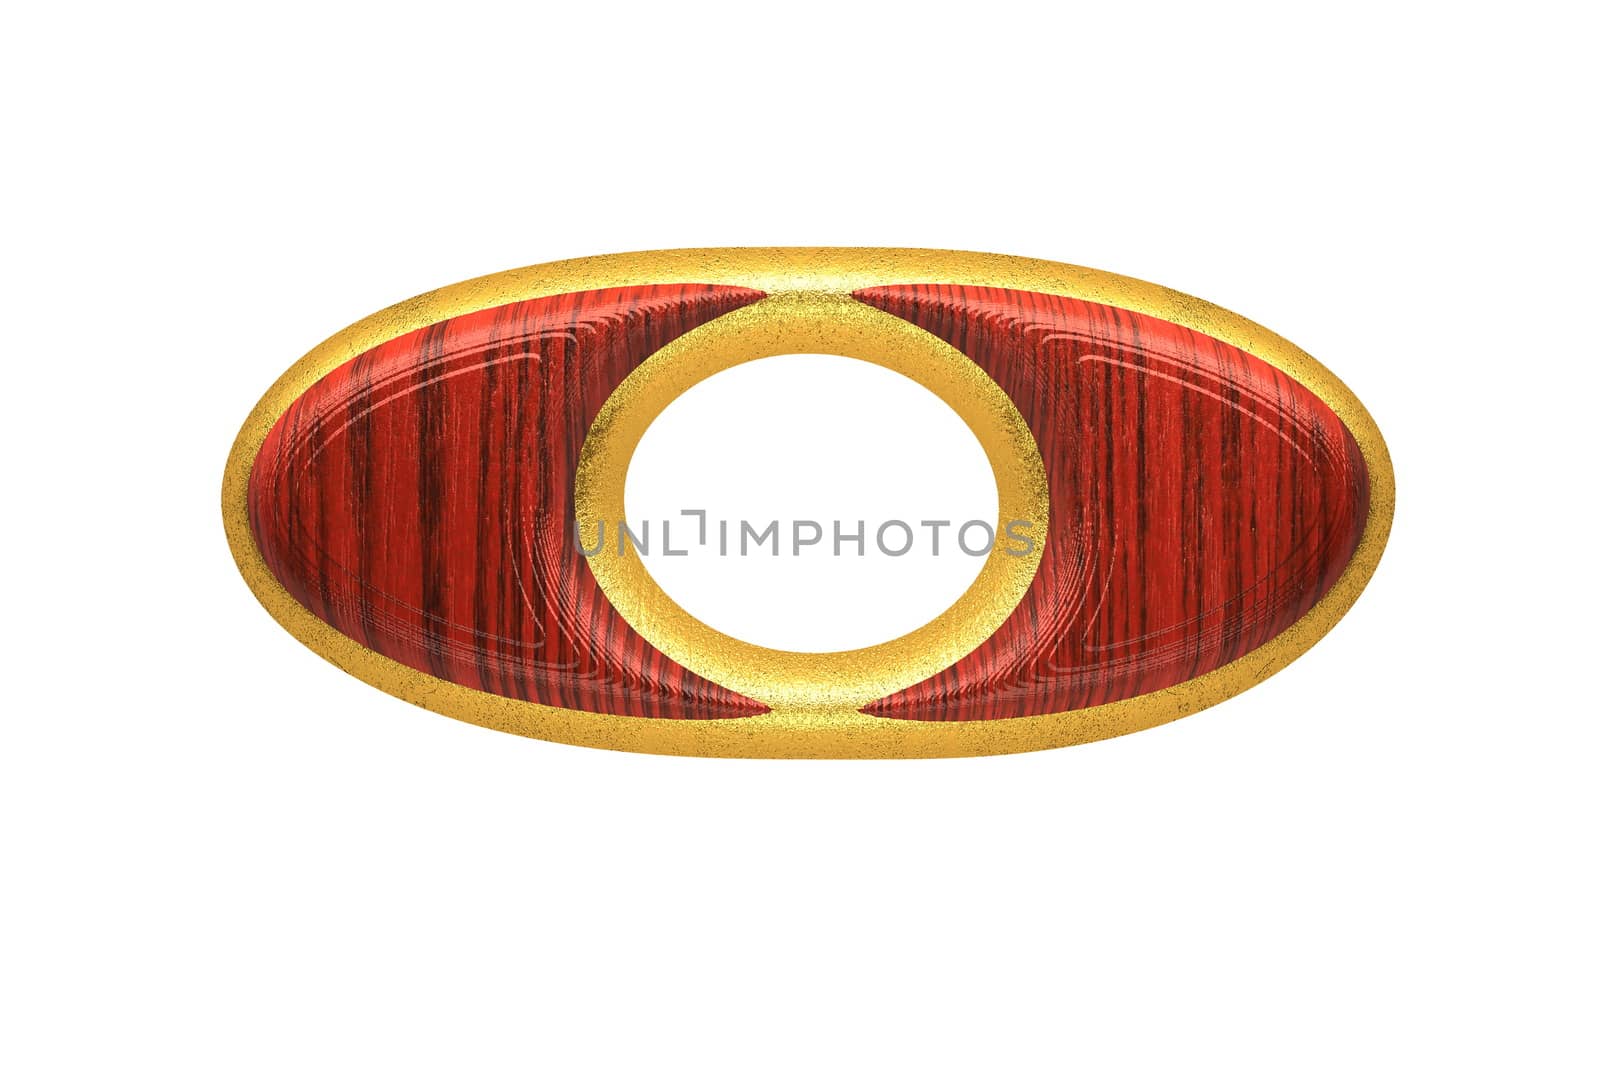 isolated golden figure with red wood